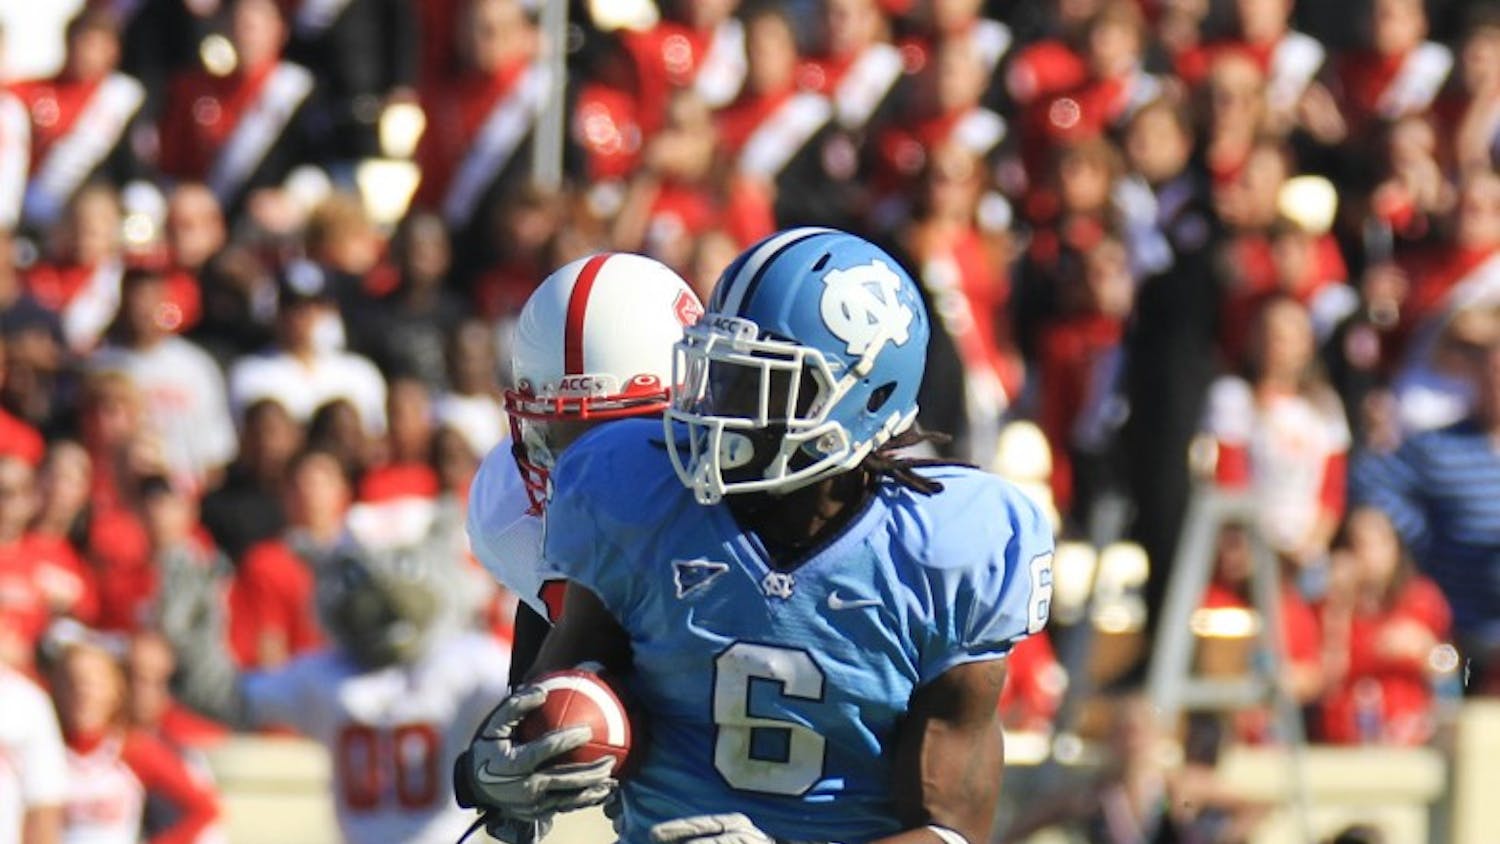 Anthony Elzy scored the Heels' only touchdown of the first half.